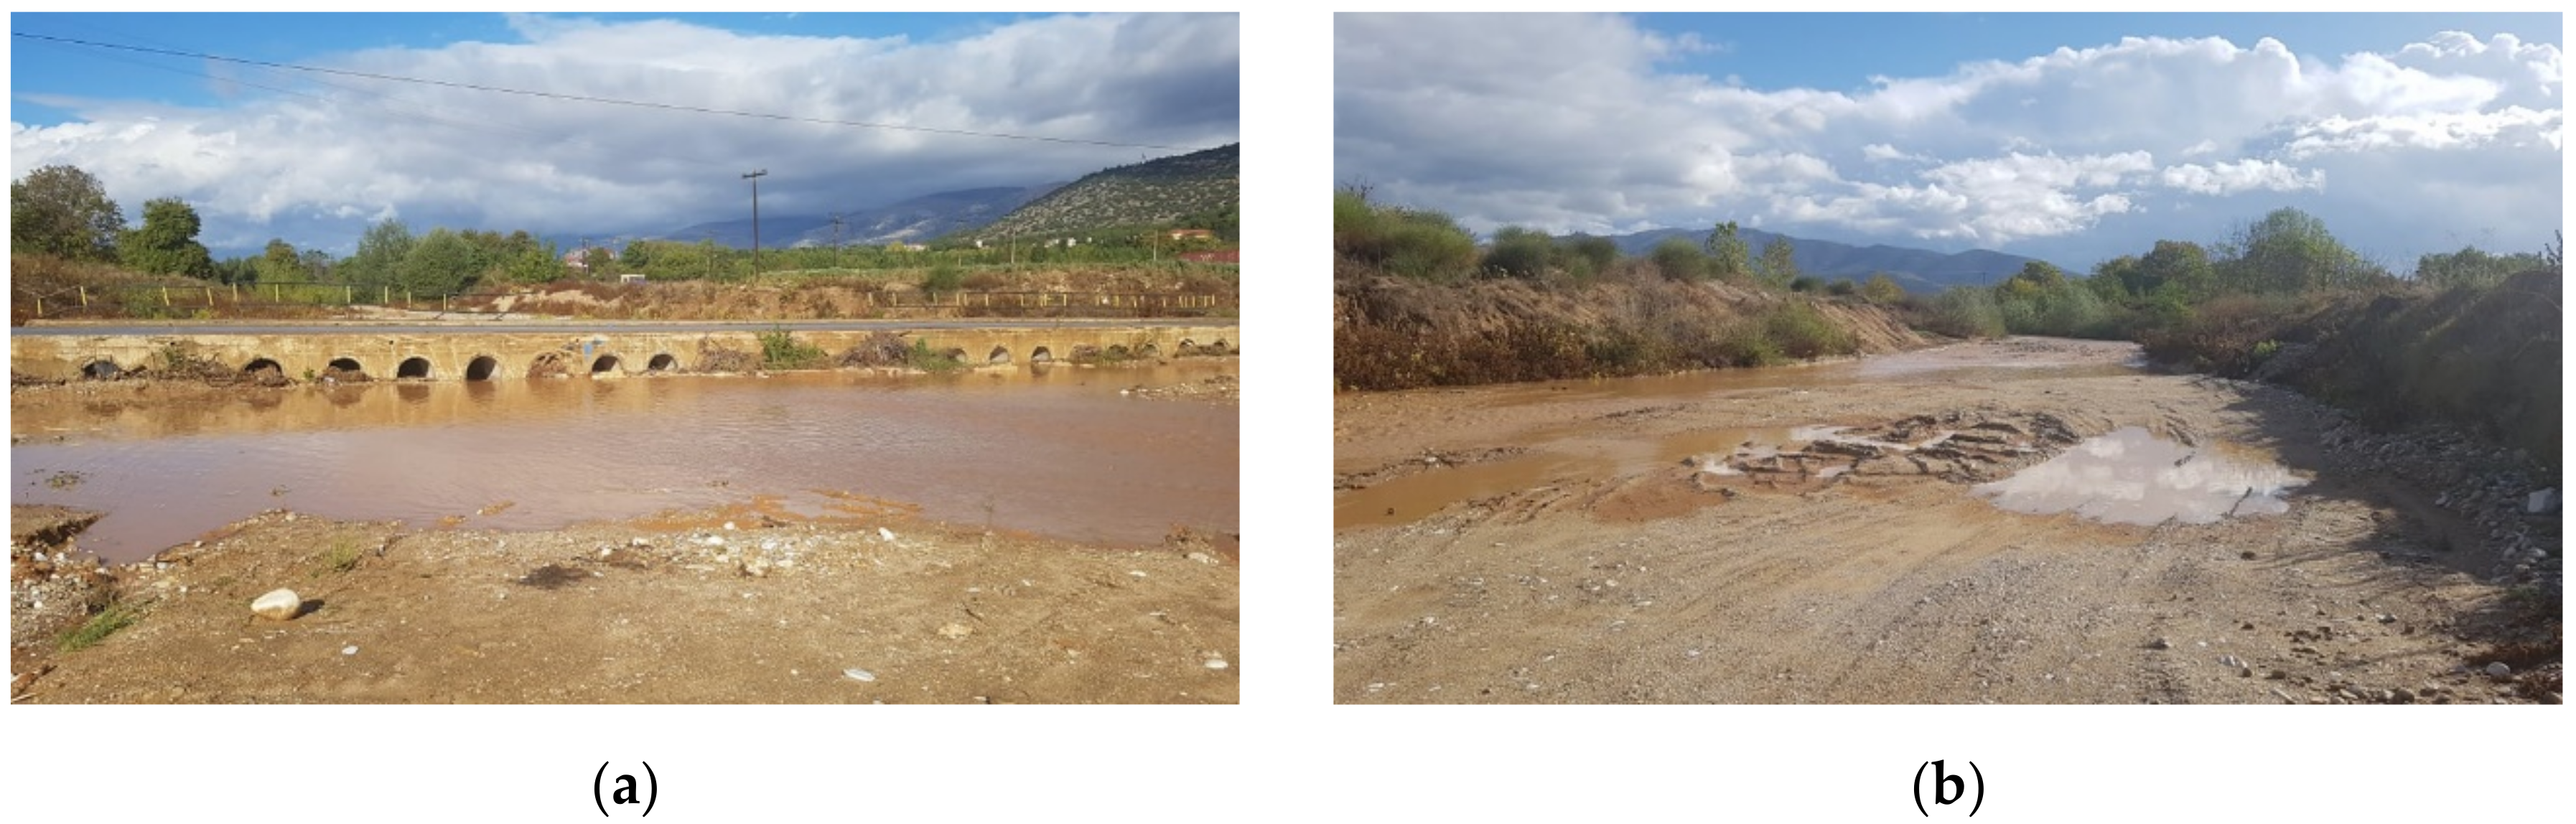 Drones | Free Full-Text | Using UAV to Capture and Record Torrent Bed and  Banks, Flood Debris, and Riparian Areas | HTML